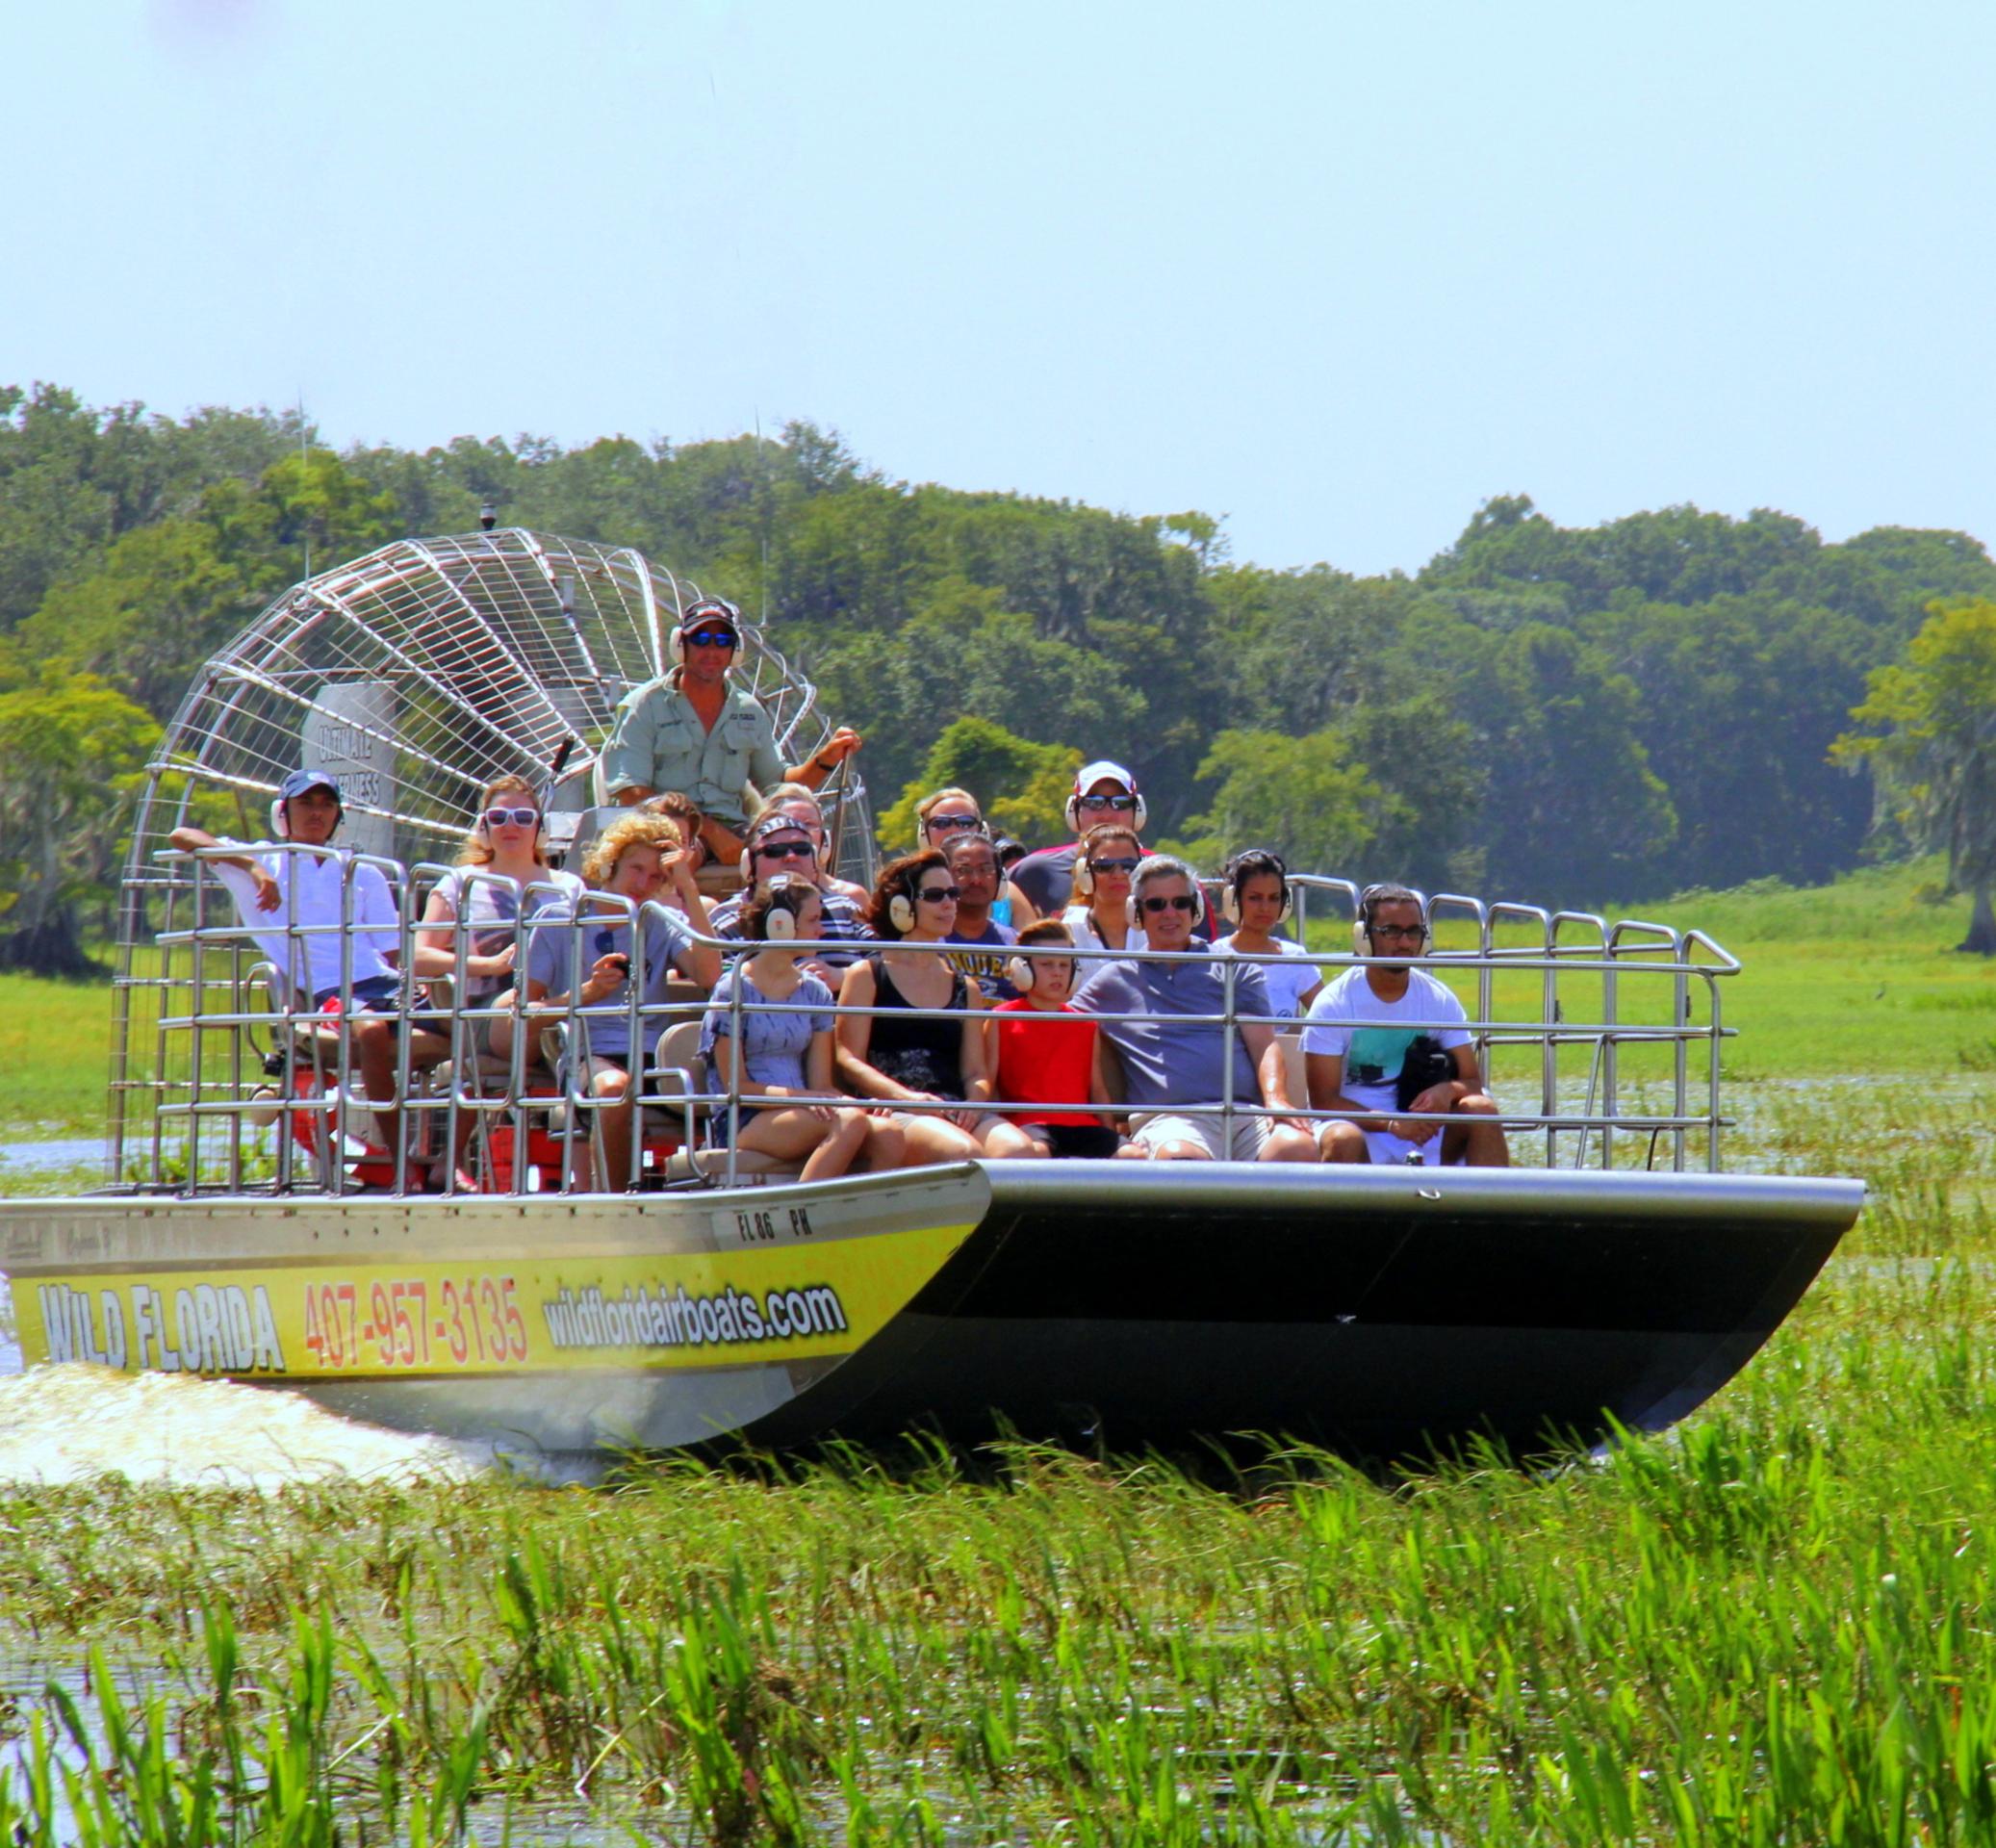 Airboat tour of the swamps- Transport from Orlando included